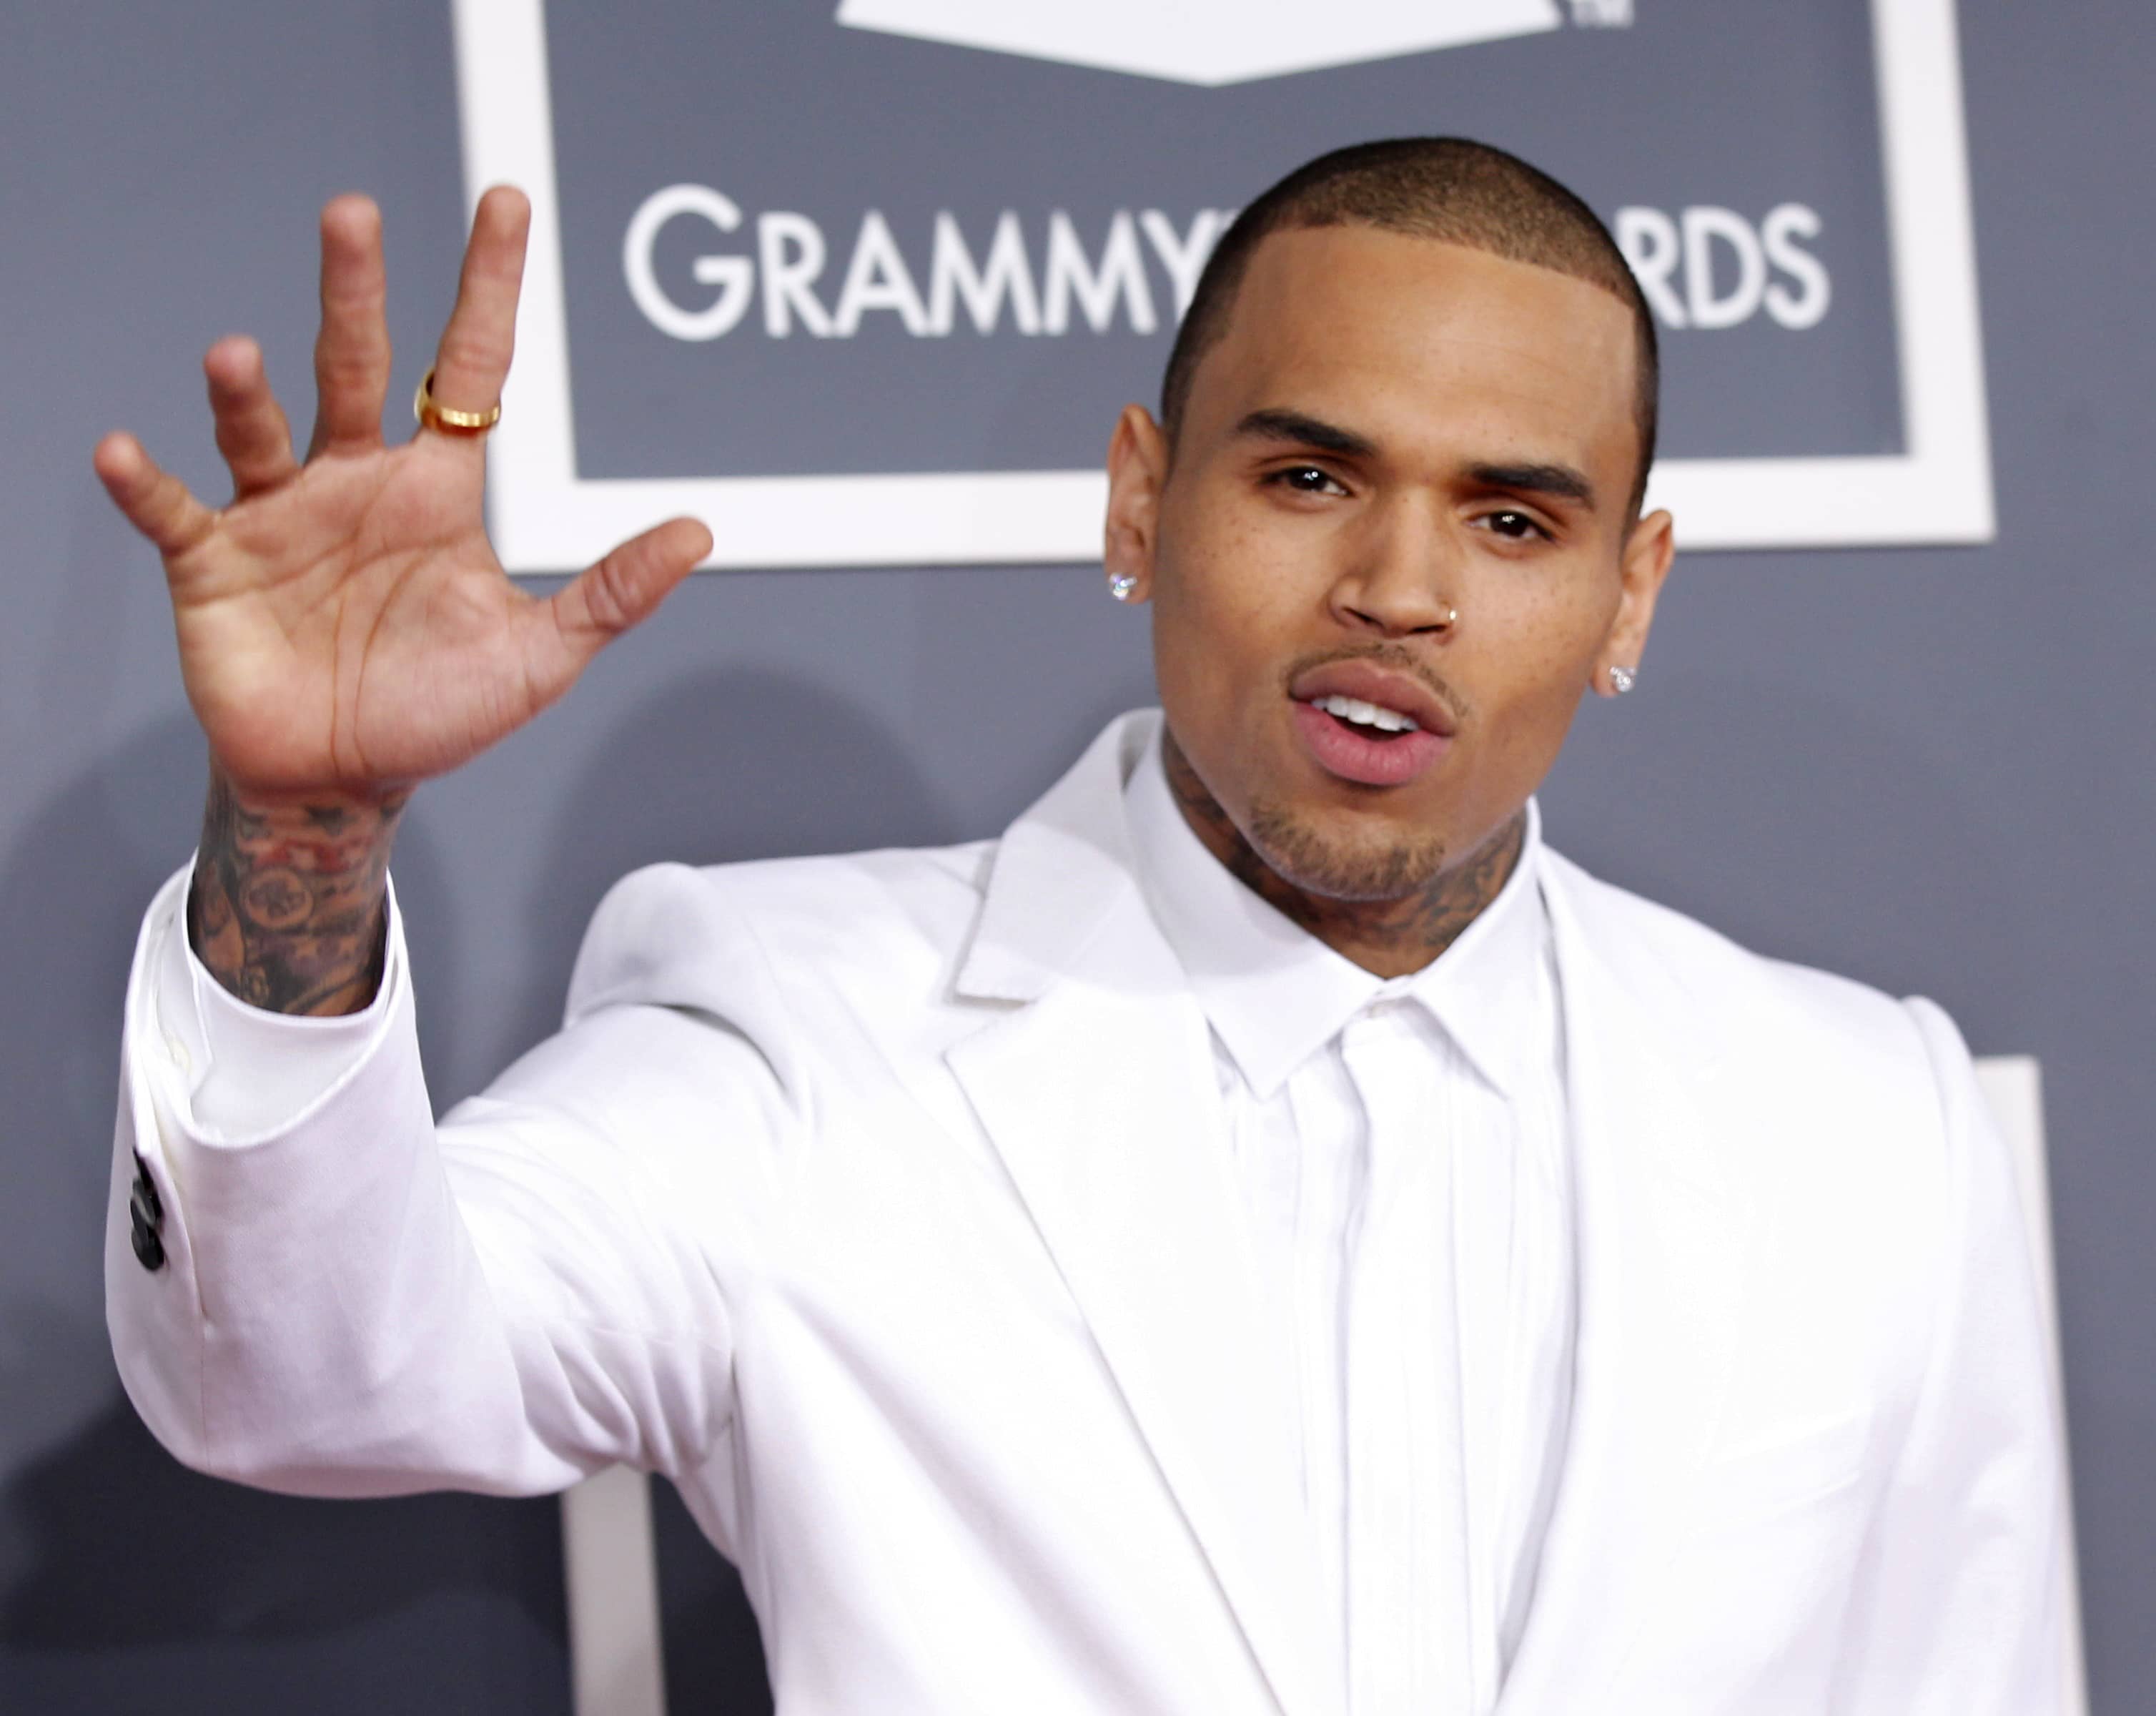 singer-chris-brown-arrives-at-the-55th-annual-grammy-awards-in-los-angeles-2